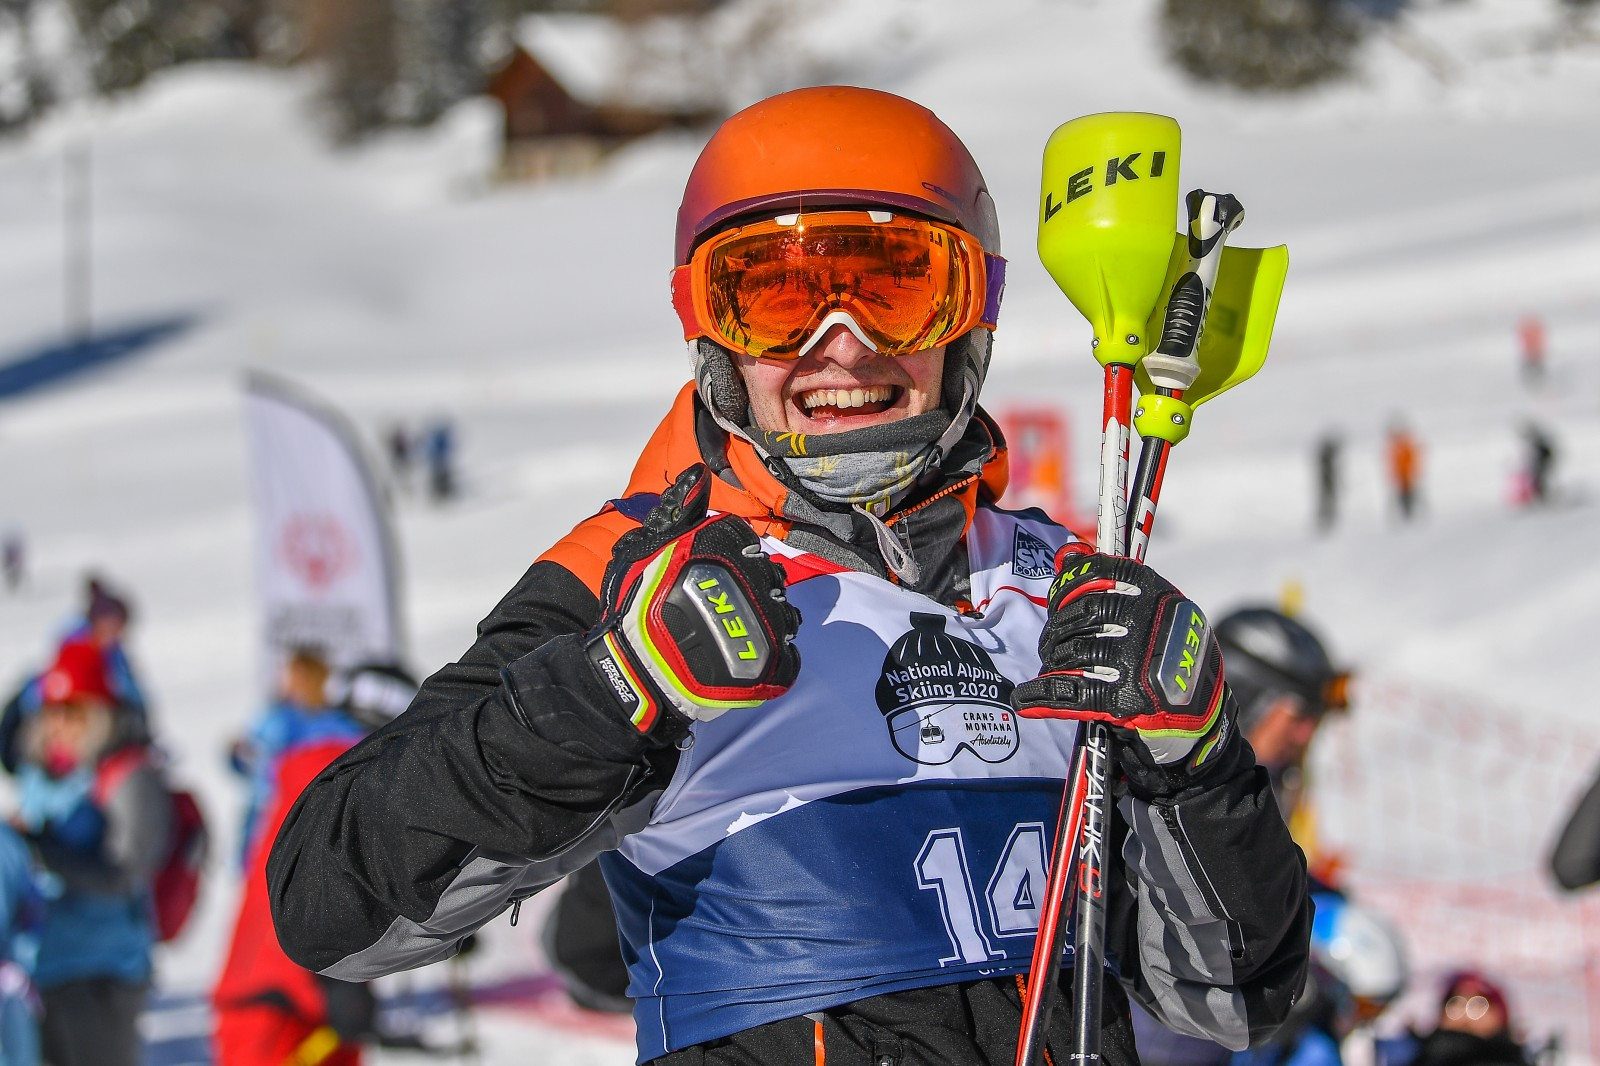 Special Olympics GB has announced its team for the 2022 Special Olympics World Winter Games in Kazan ©Special Olympics GB